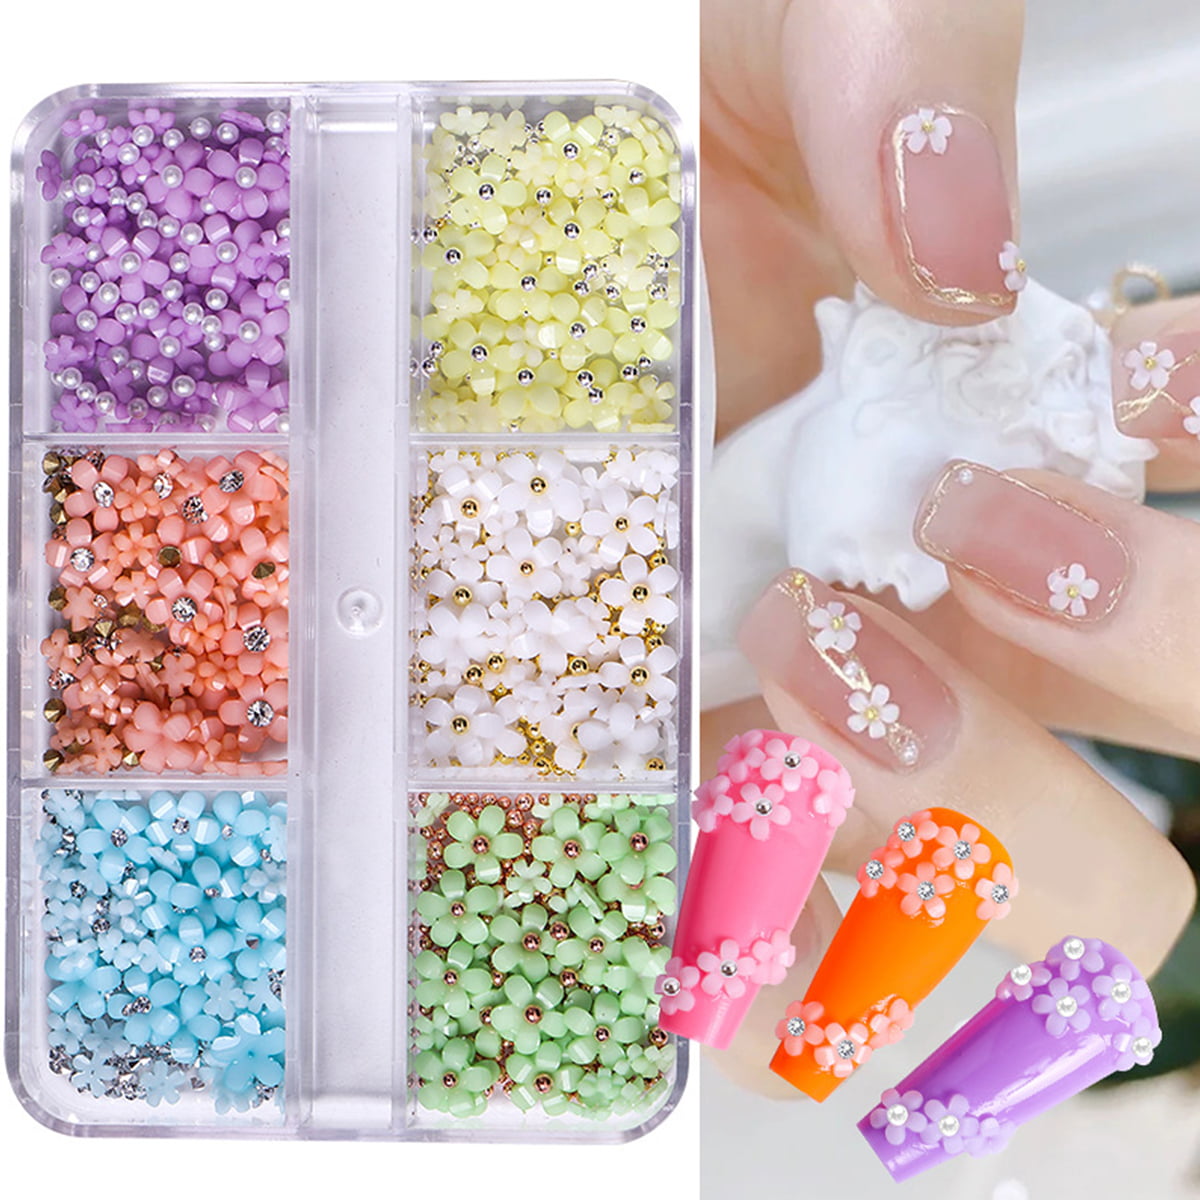 12 Grids 3d Acrylic Flower Charms Nail Art Decorations Mixed Cherry Blossom  Diy Jewelry Gem Beads Nails Design Accessories - Rhinestones & Decorations  - AliExpress